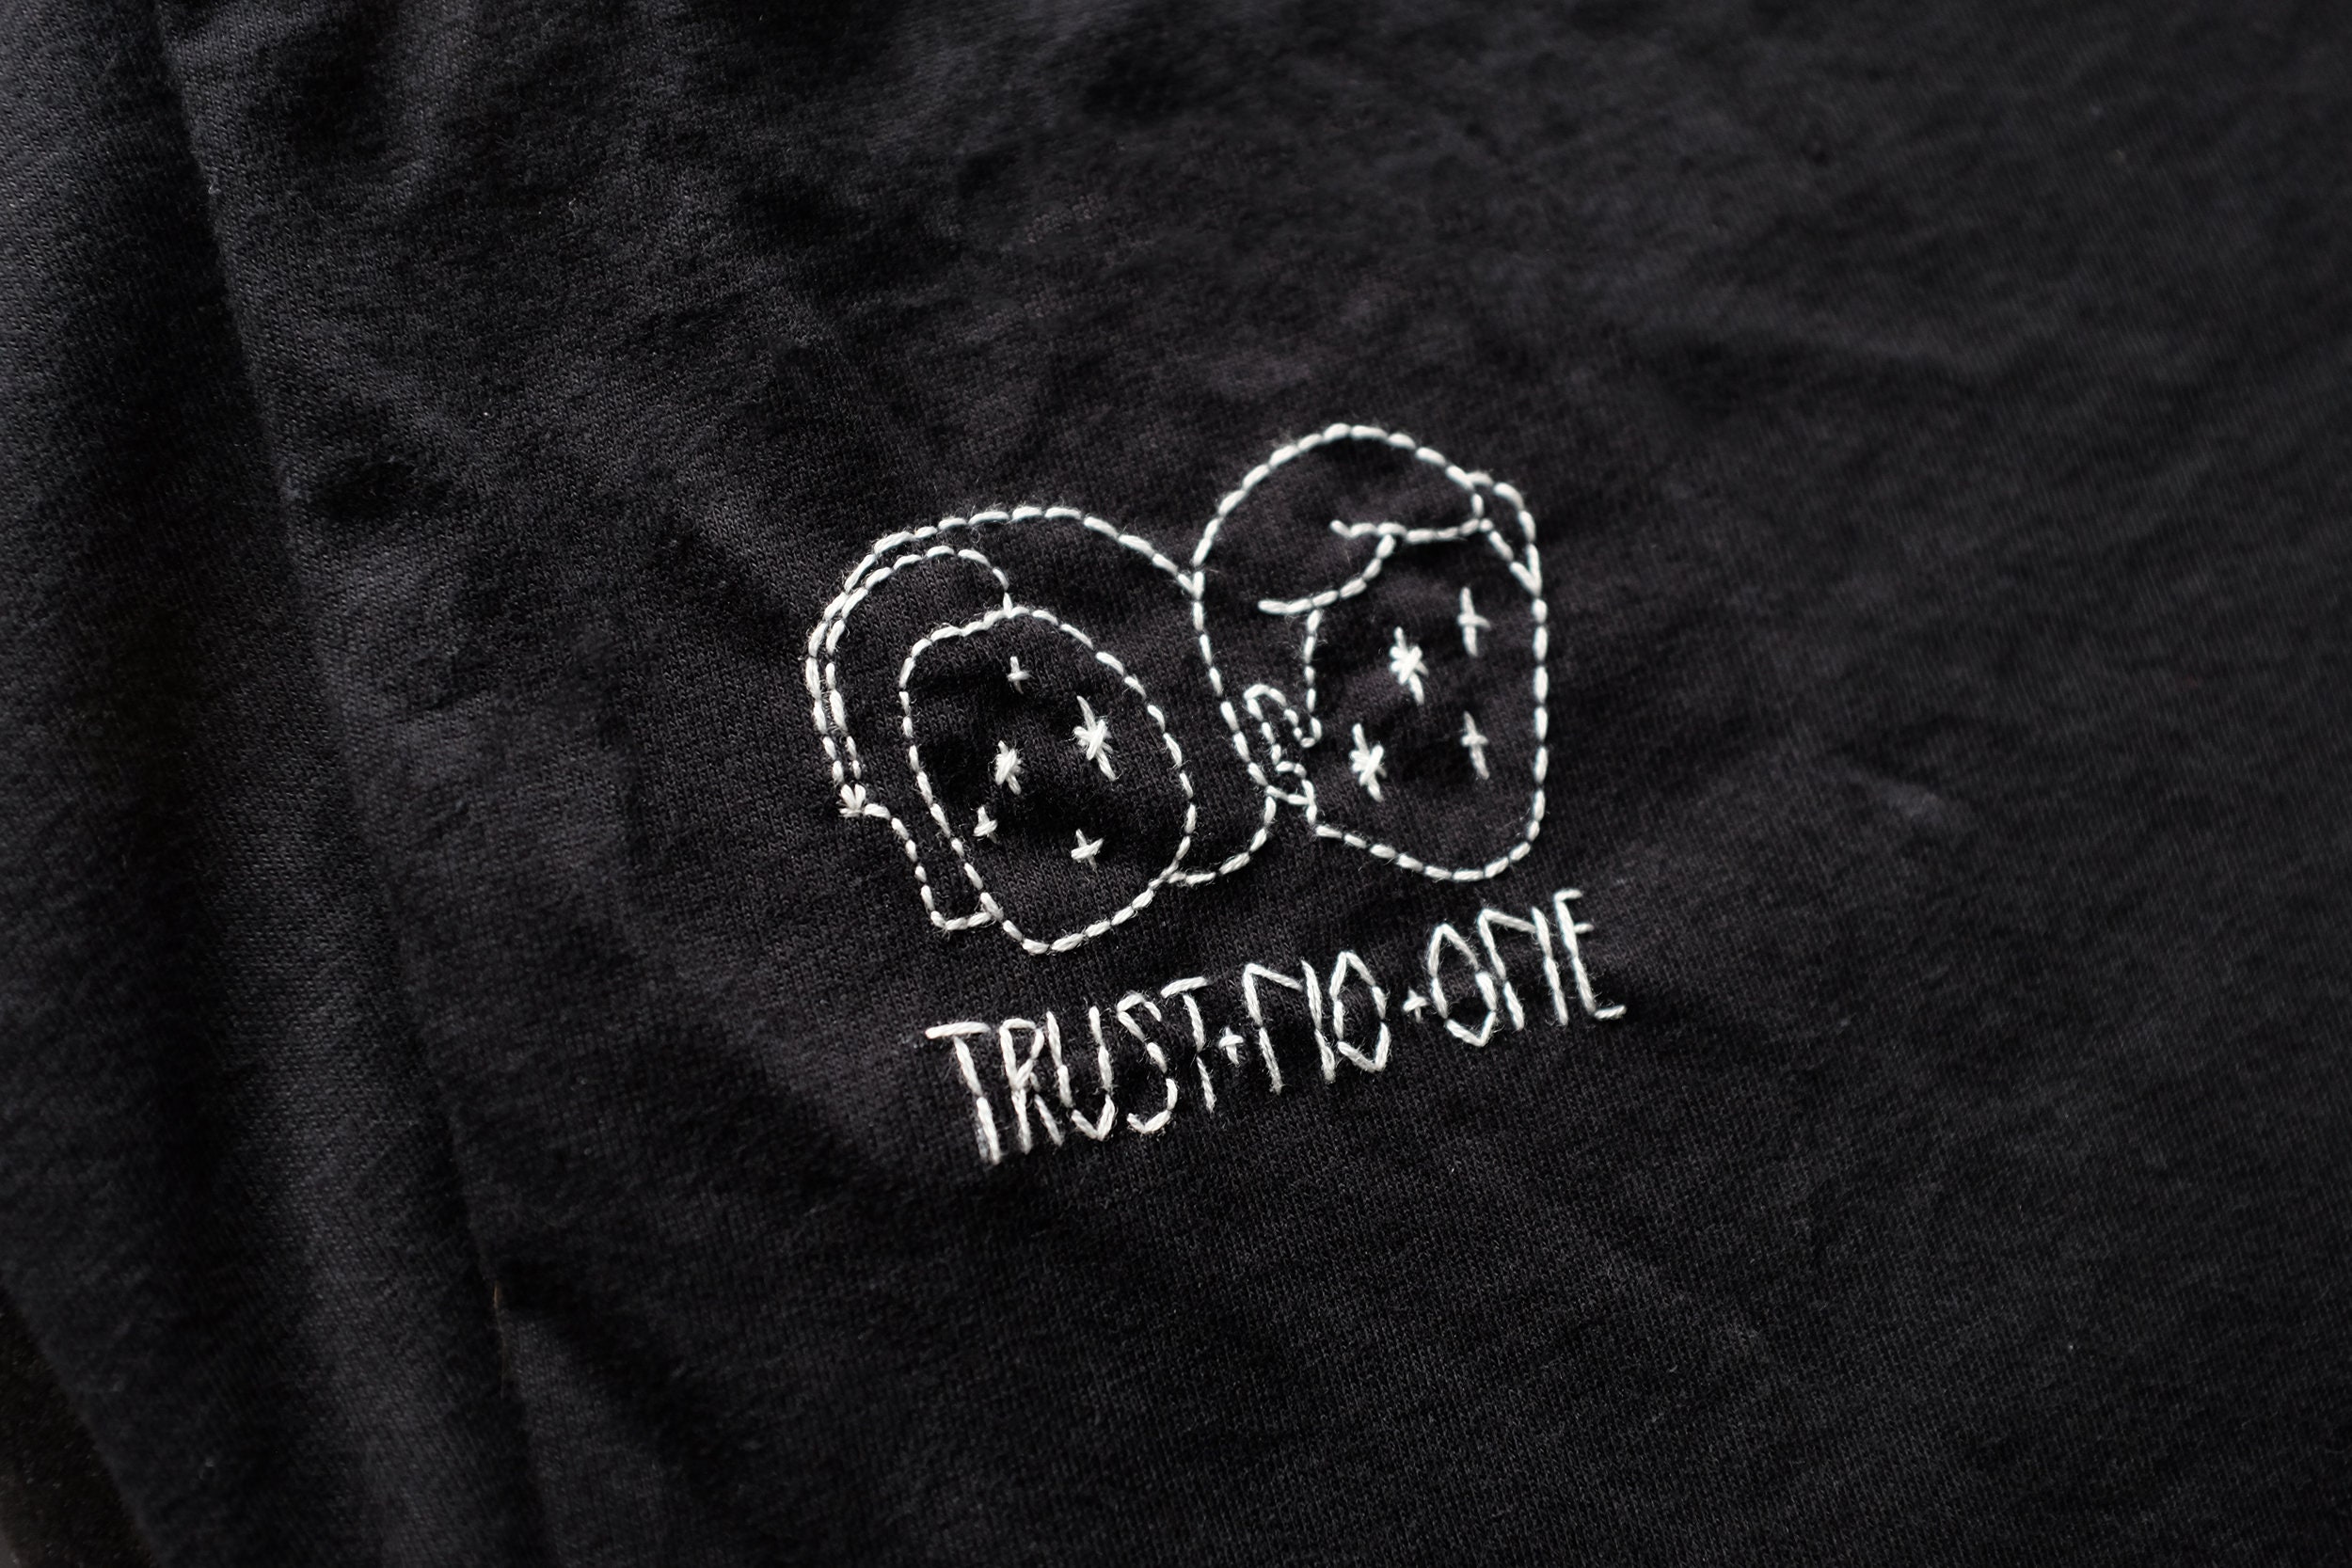 Trust No One T-shirt Mulder Scully I Want to Believe - Etsy